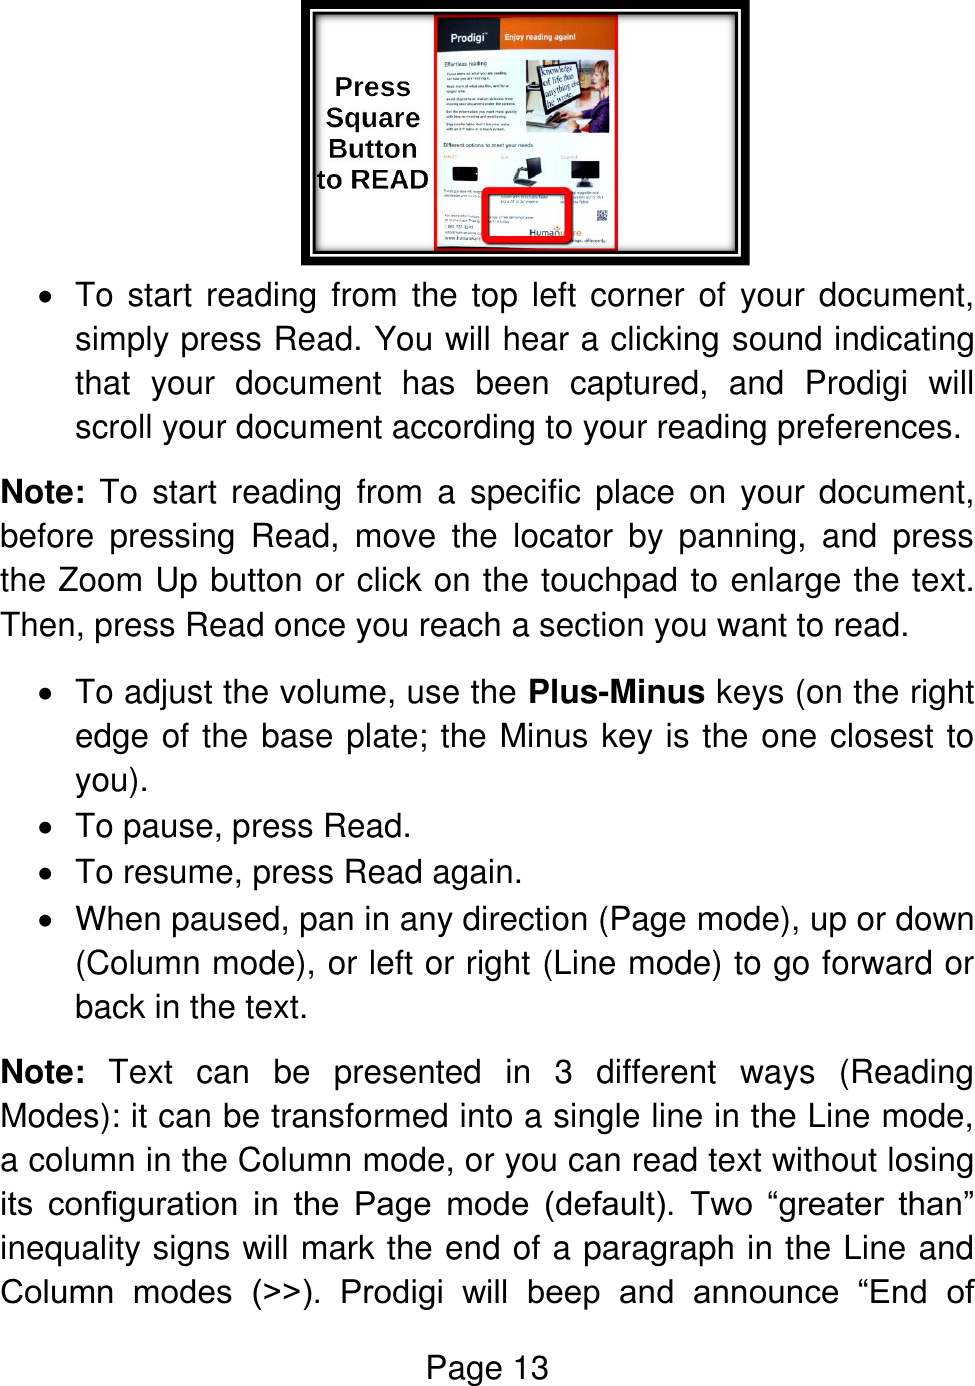 Page 13     To start reading from the top left corner of your document, simply press Read. You will hear a clicking sound indicating that  your  document  has  been  captured,  and  Prodigi  will scroll your document according to your reading preferences. Note: To start reading  from  a  specific  place  on  your document, before  pressing  Read,  move  the  locator  by  panning,  and  press the Zoom Up button or click on the touchpad to enlarge the text. Then, press Read once you reach a section you want to read.   To adjust the volume, use the Plus-Minus keys (on the right edge of the base plate; the Minus key is the one closest to you).   To pause, press Read.   To resume, press Read again.   When paused, pan in any direction (Page mode), up or down (Column mode), or left or right (Line mode) to go forward or back in the text.  Note:  Text  can  be  presented  in  3  different  ways  (Reading Modes): it can be transformed into a single line in the Line mode, a column in the Column mode, or you can read text without losing its  configuration  in  the  Page  mode  (default).  Two  “greater  than” inequality signs will mark the end of a paragraph in the Line and Column  modes  (˃˃).  Prodigi  will  beep  and  announce  “End  of 